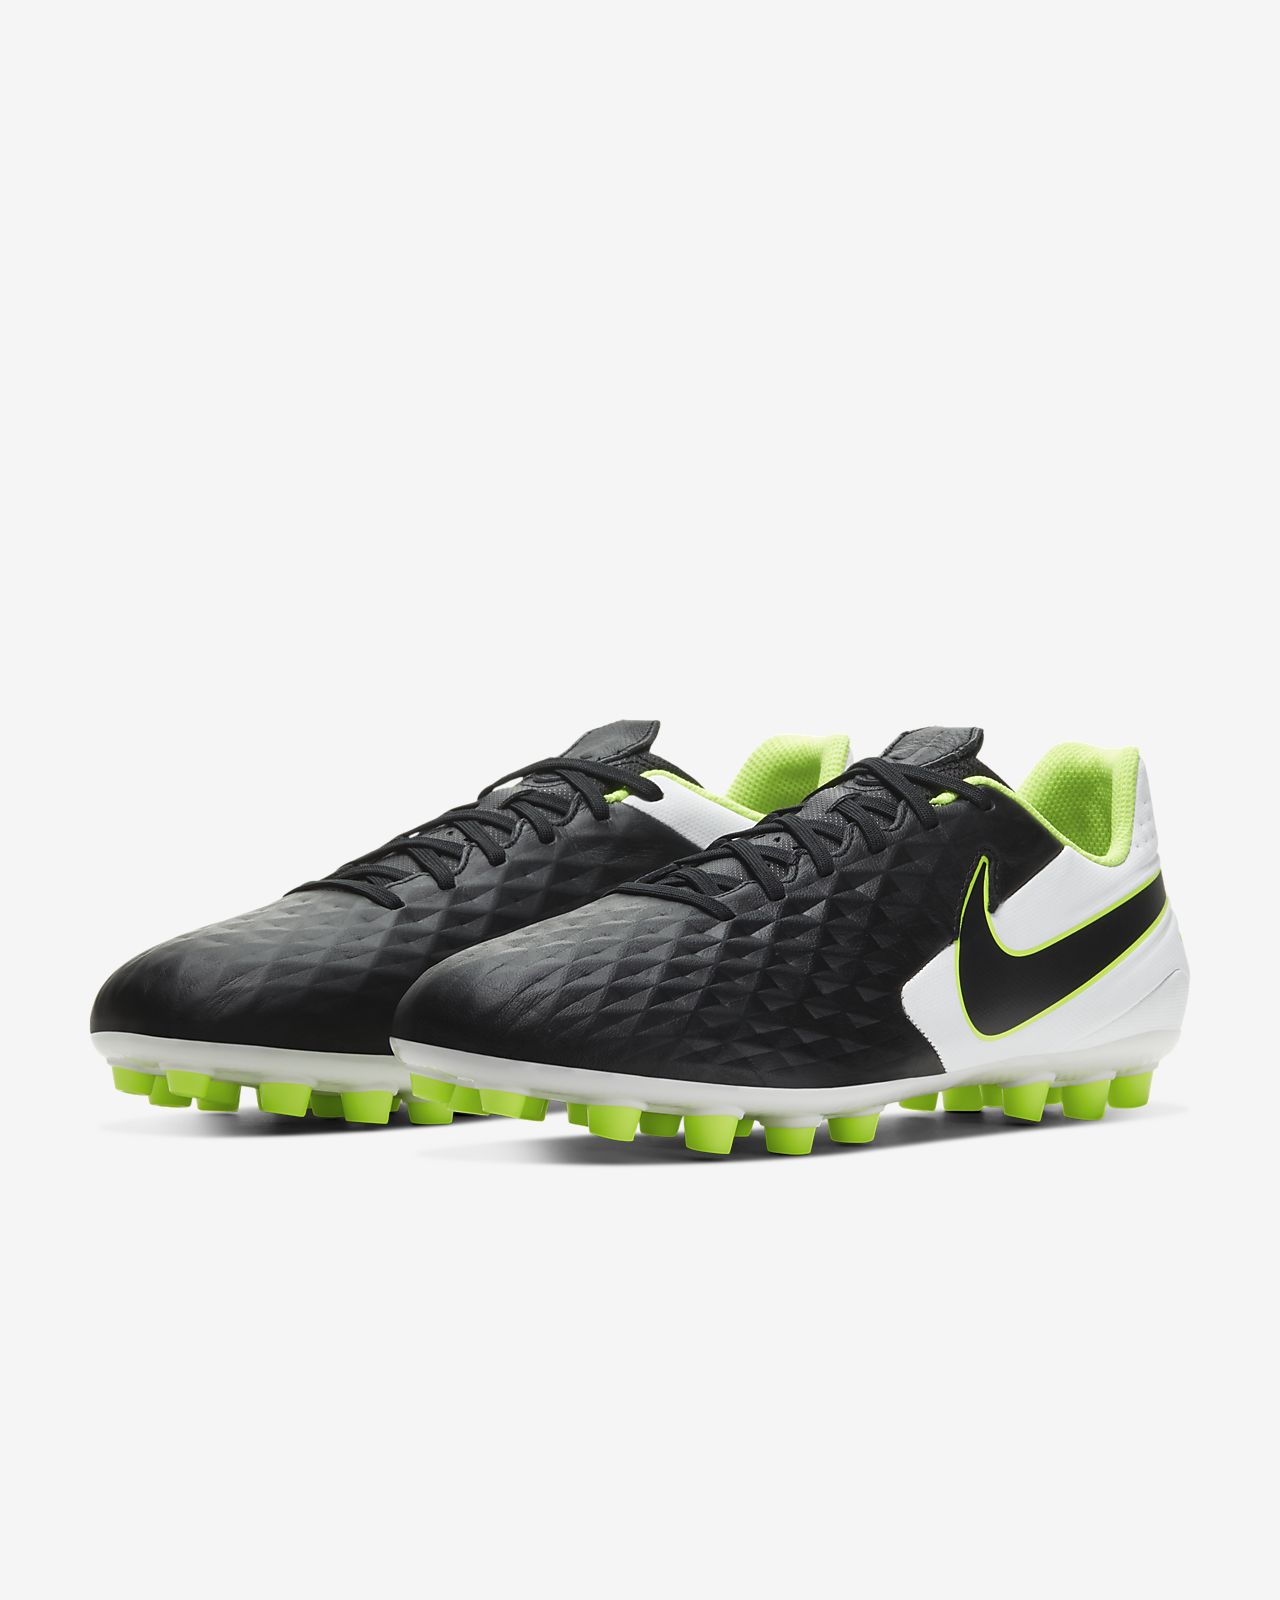 Nike Weather Legend 8 Academy Ag At6012 004 Price i.